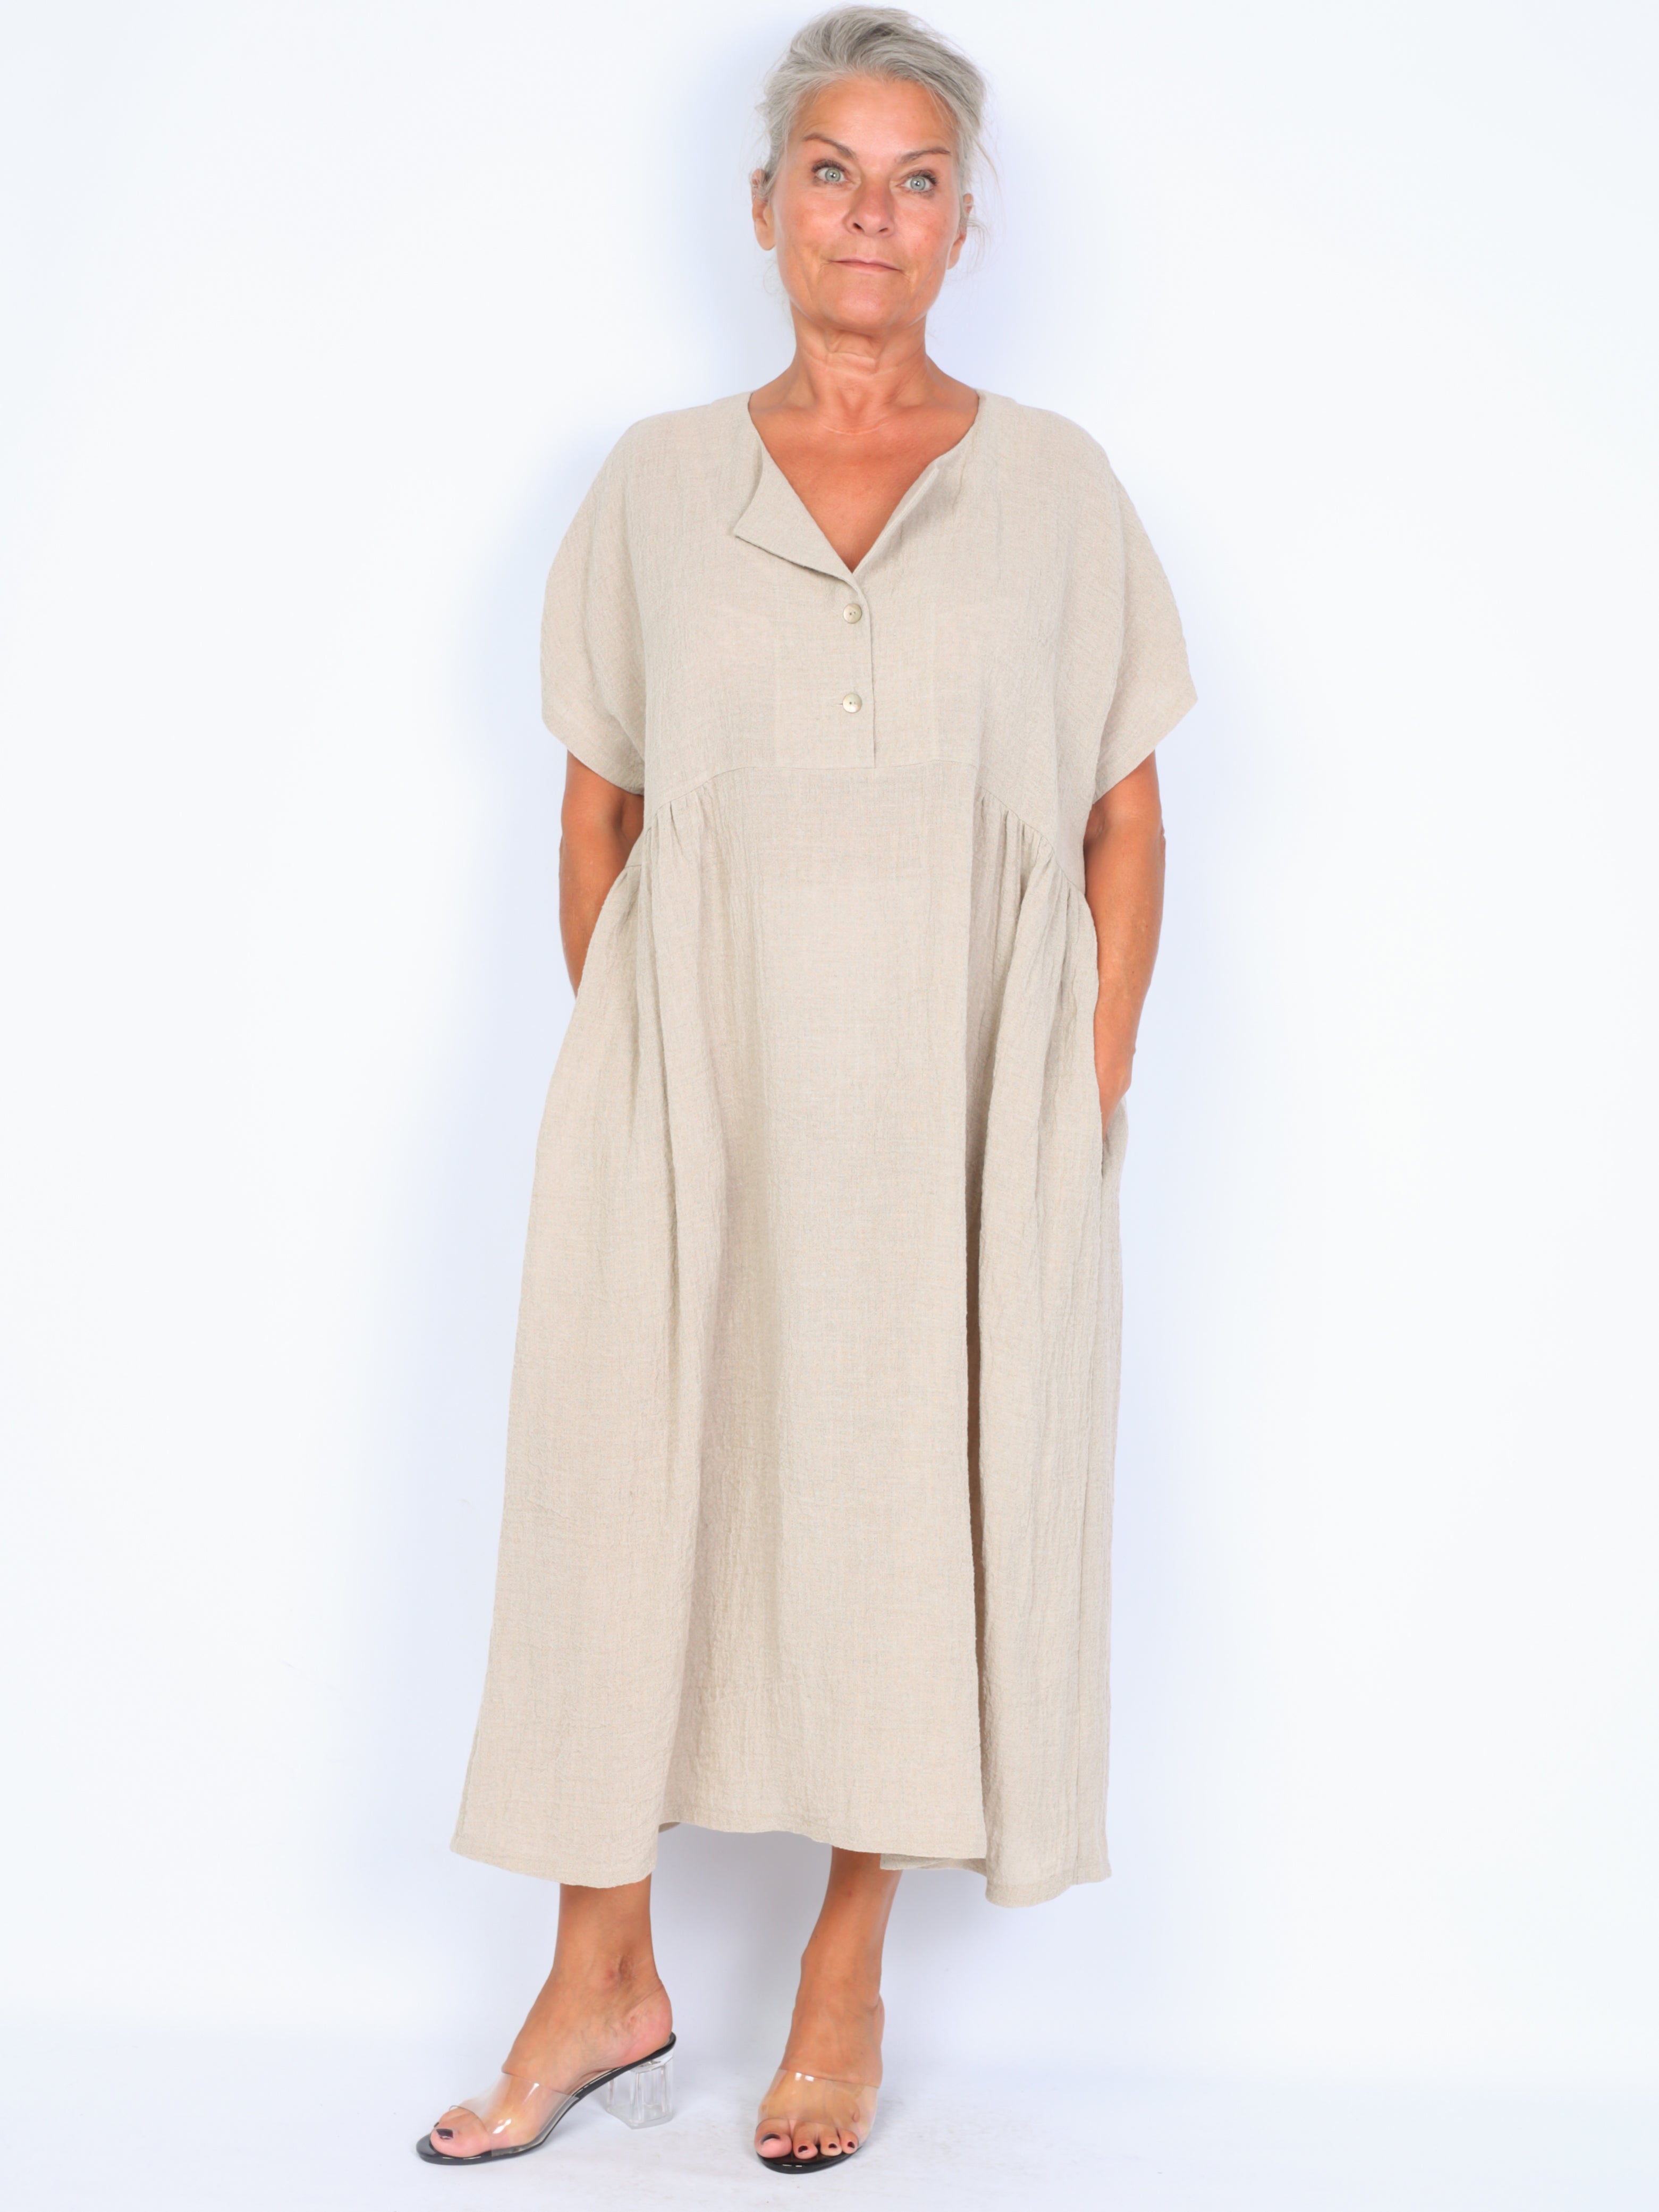 Some linen dress with buttons